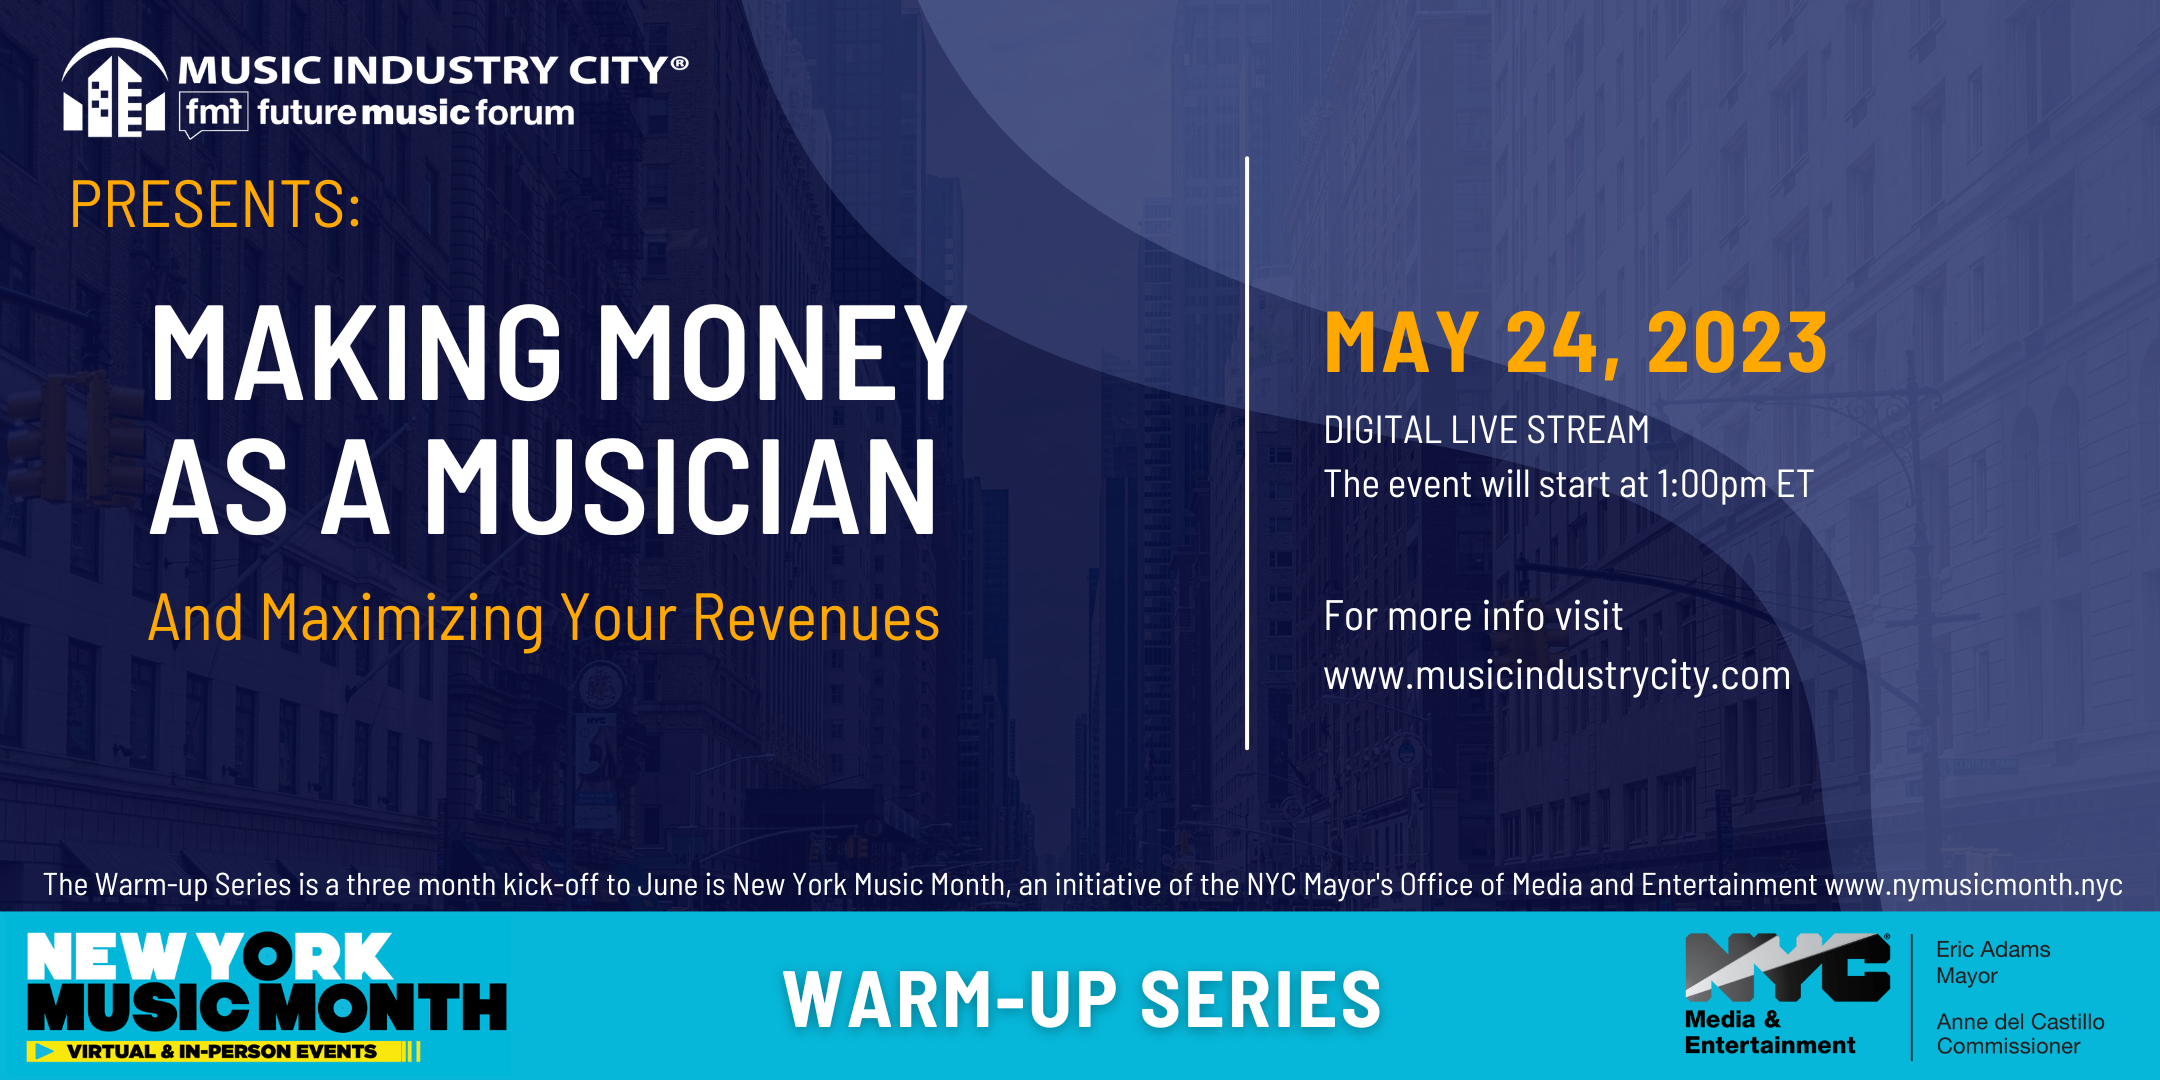 Making money as a musician may 24 2023 1pm